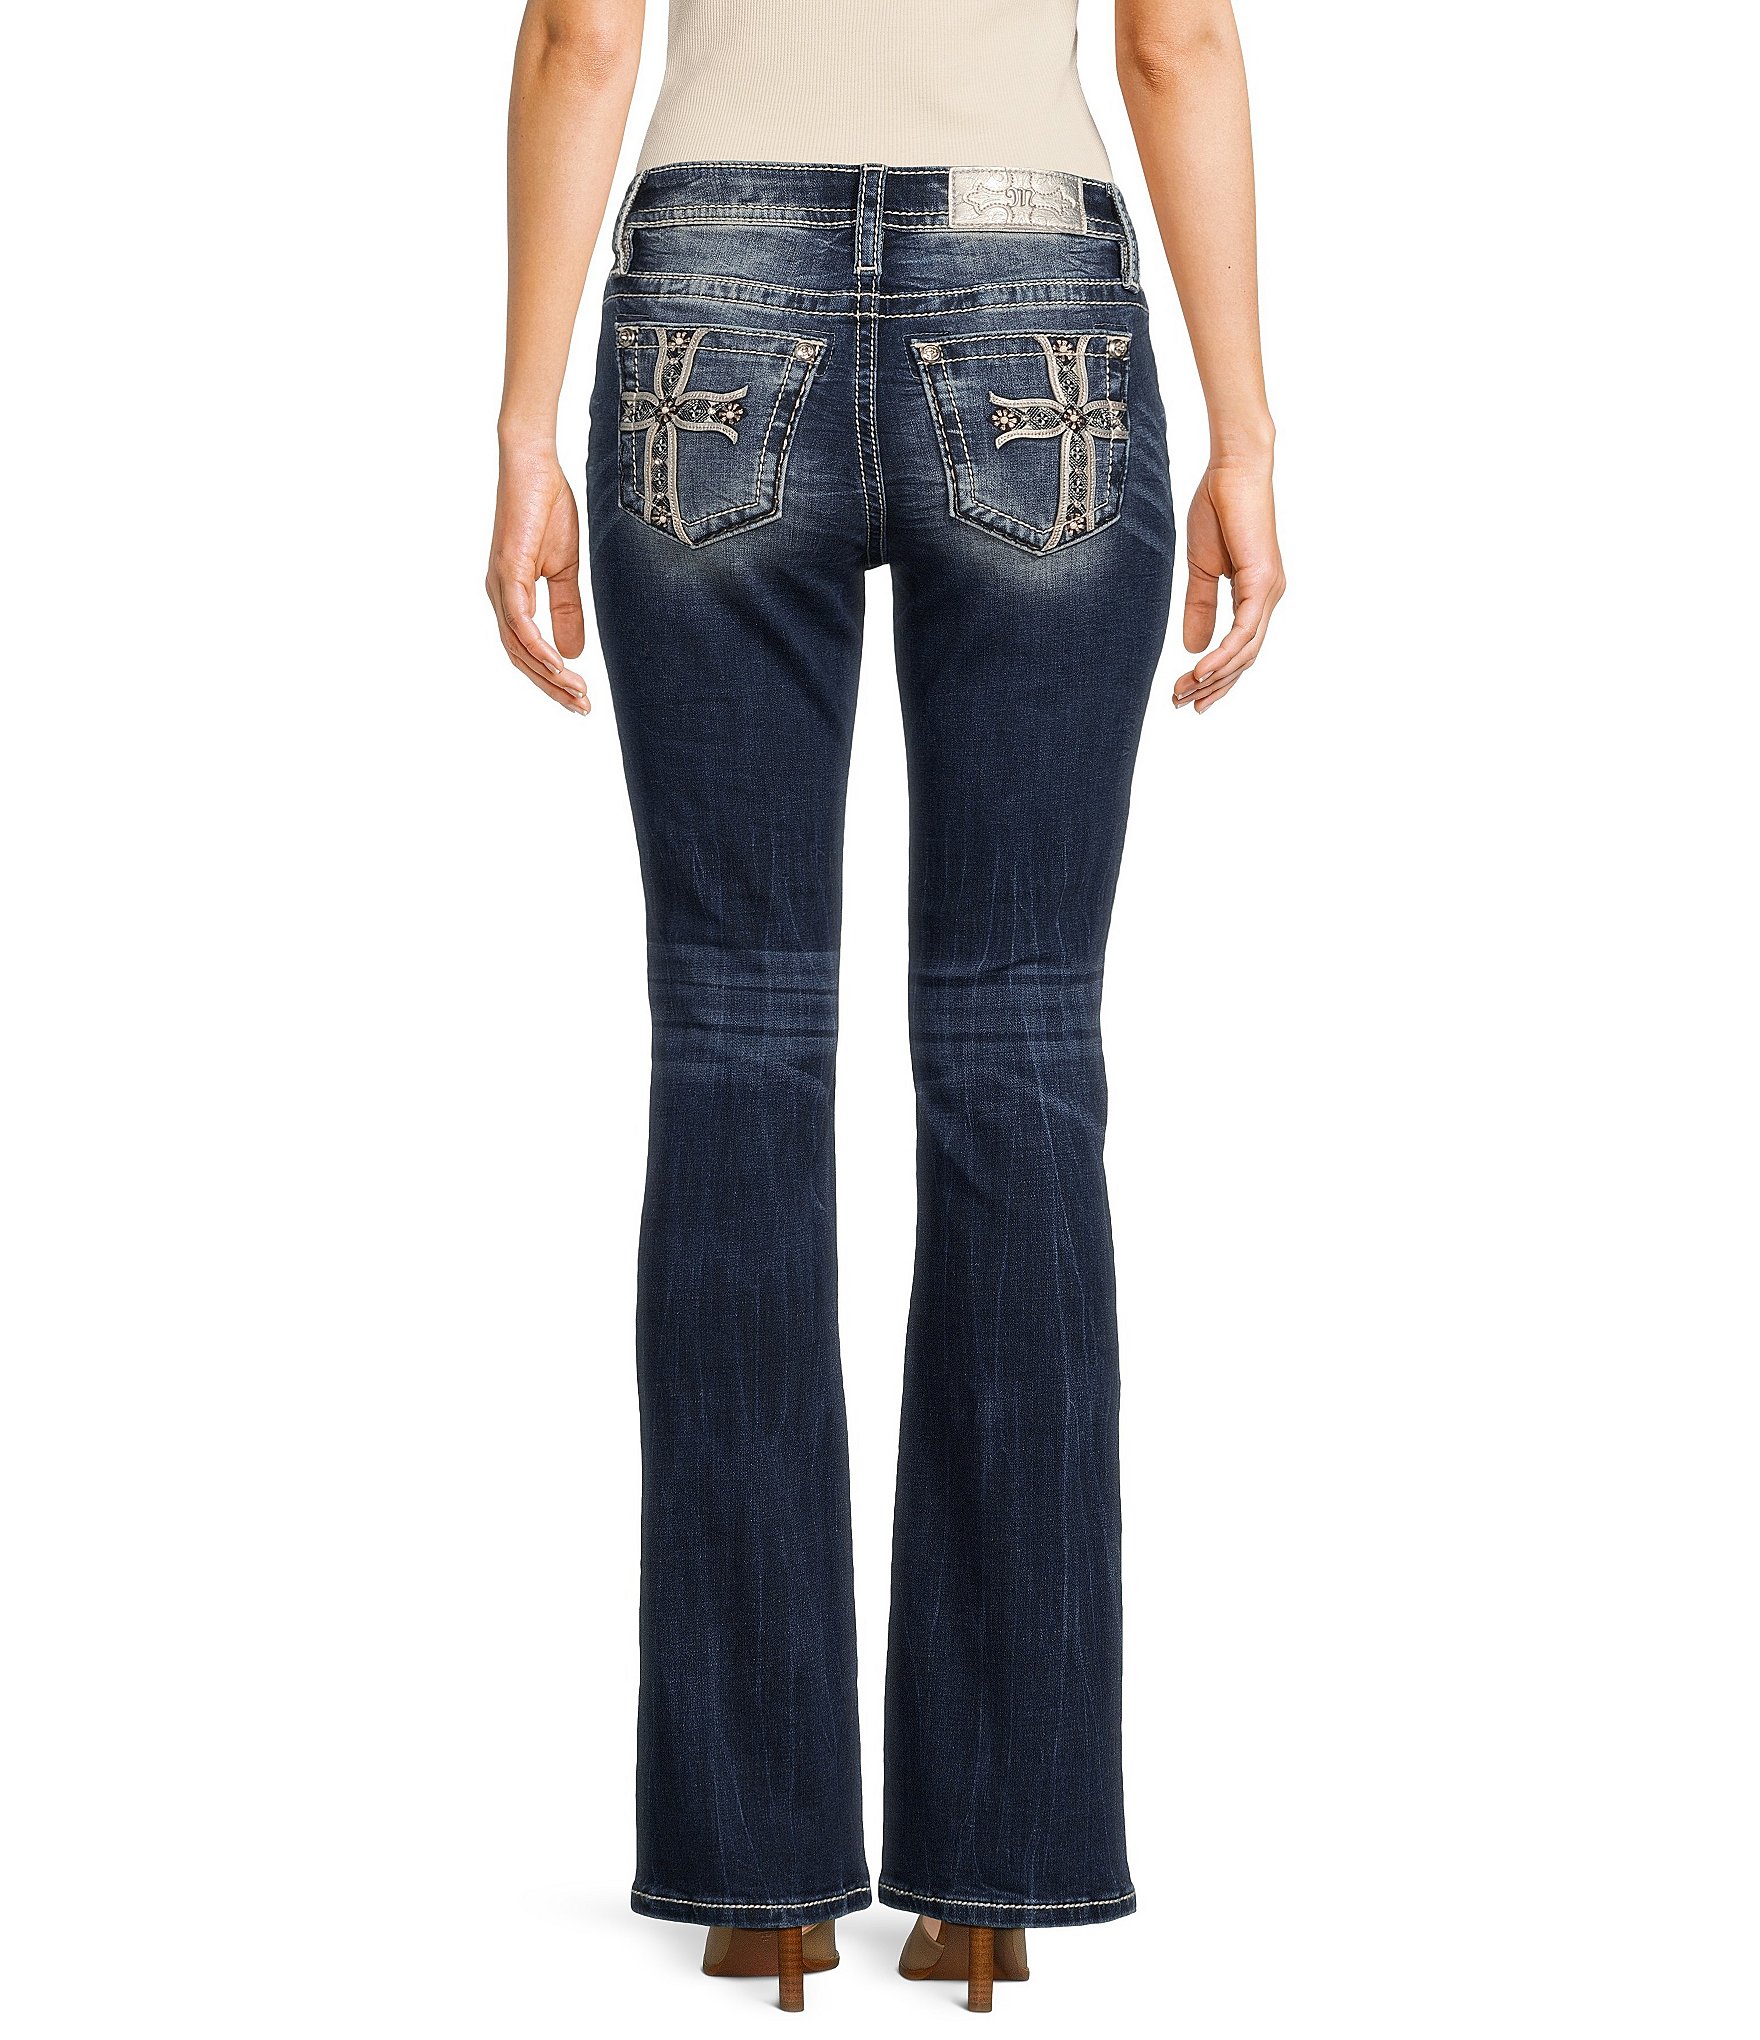 Miss Me Women's Dark Wash Mid-Rise Embroidered Bootcut Stretch